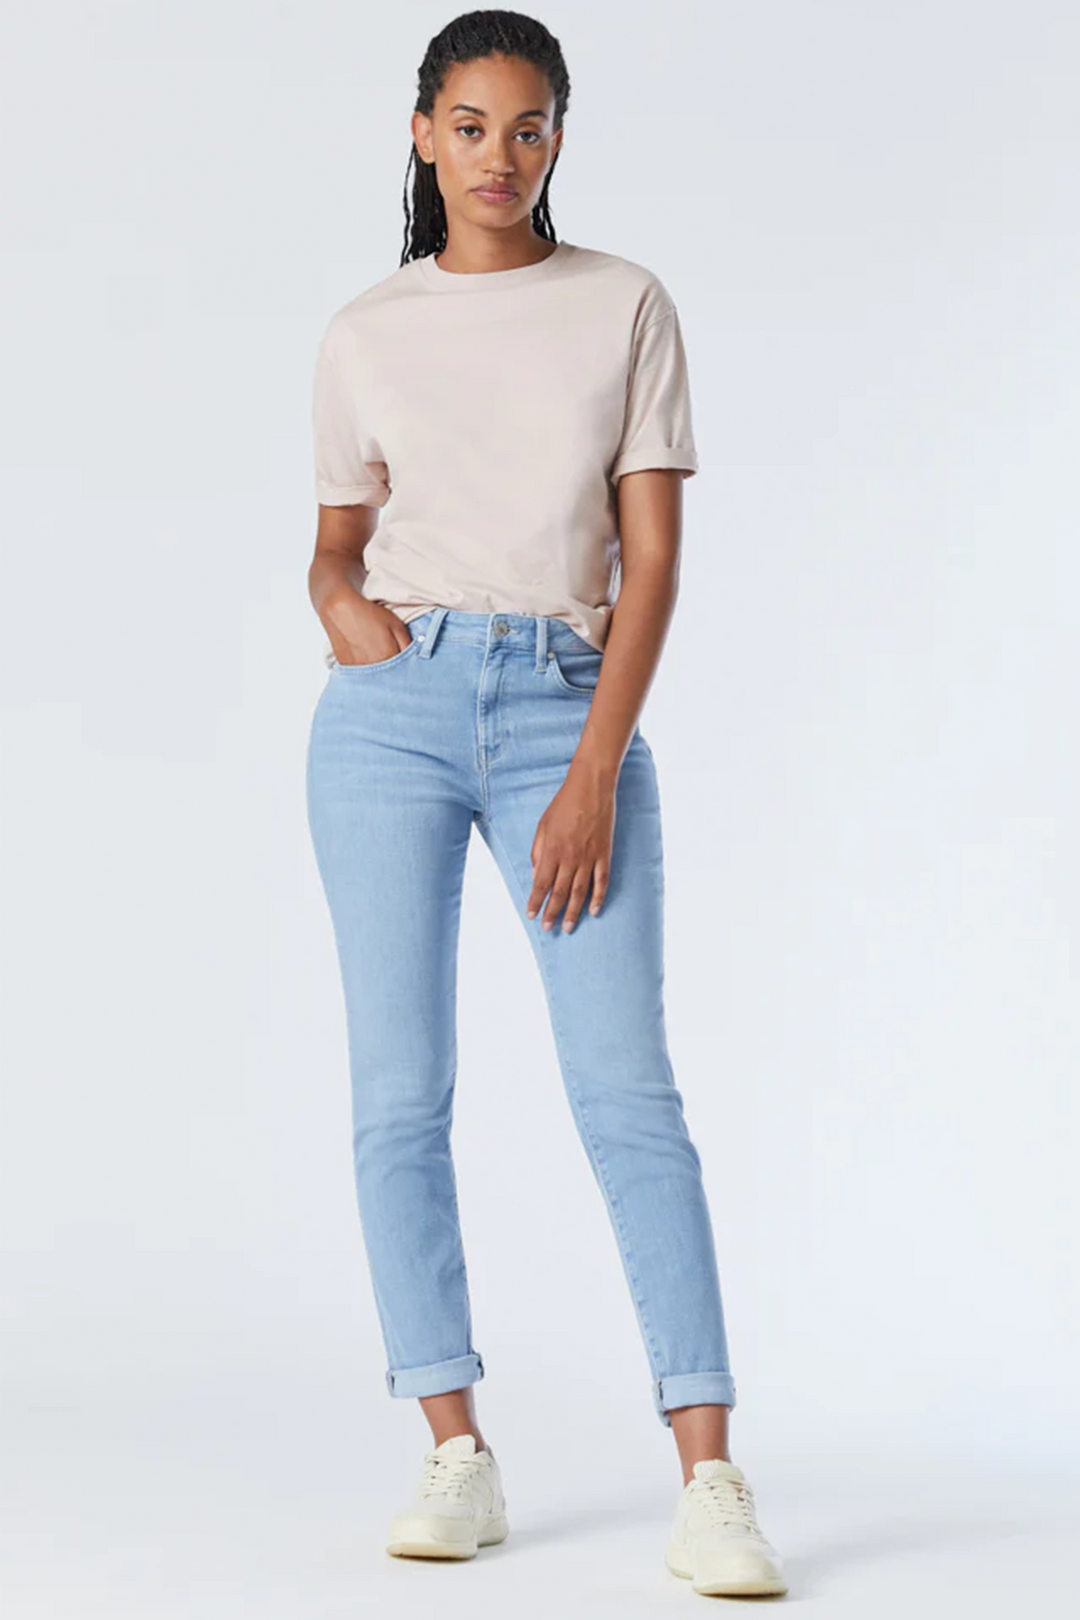 Mavi Spring 2024 Introducing the Kathleen Slim Boyfriend, a midweight denim jean that offers a slim fit and high rise for a flattering silhouette.